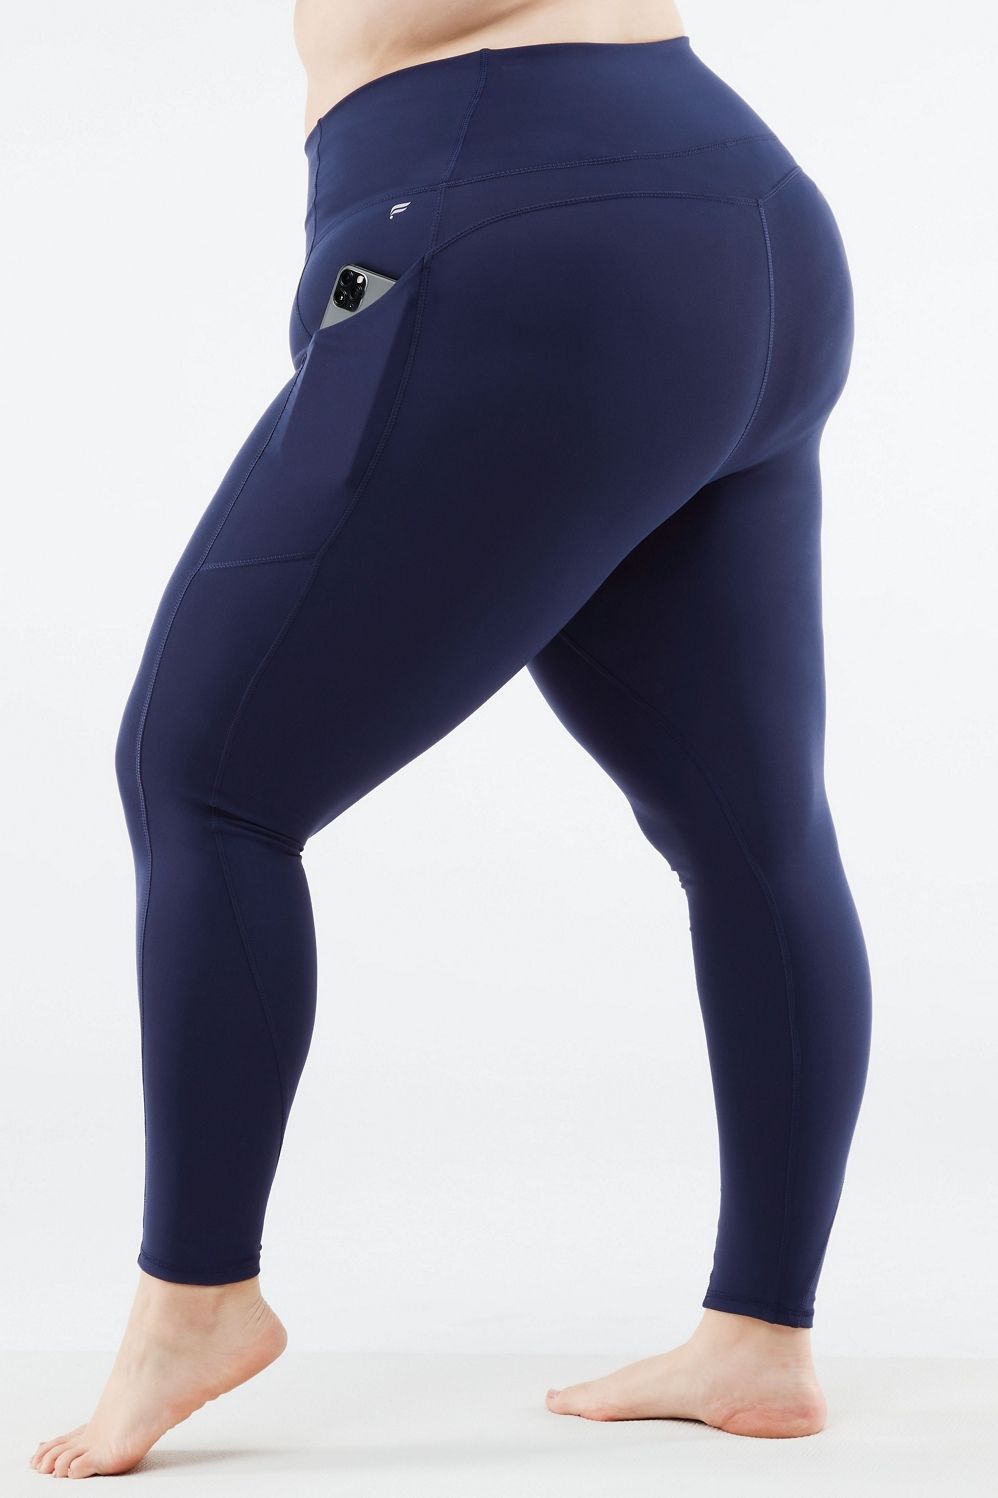 Oasis PureLuxe High-Waisted Legging | Fabletics - North America